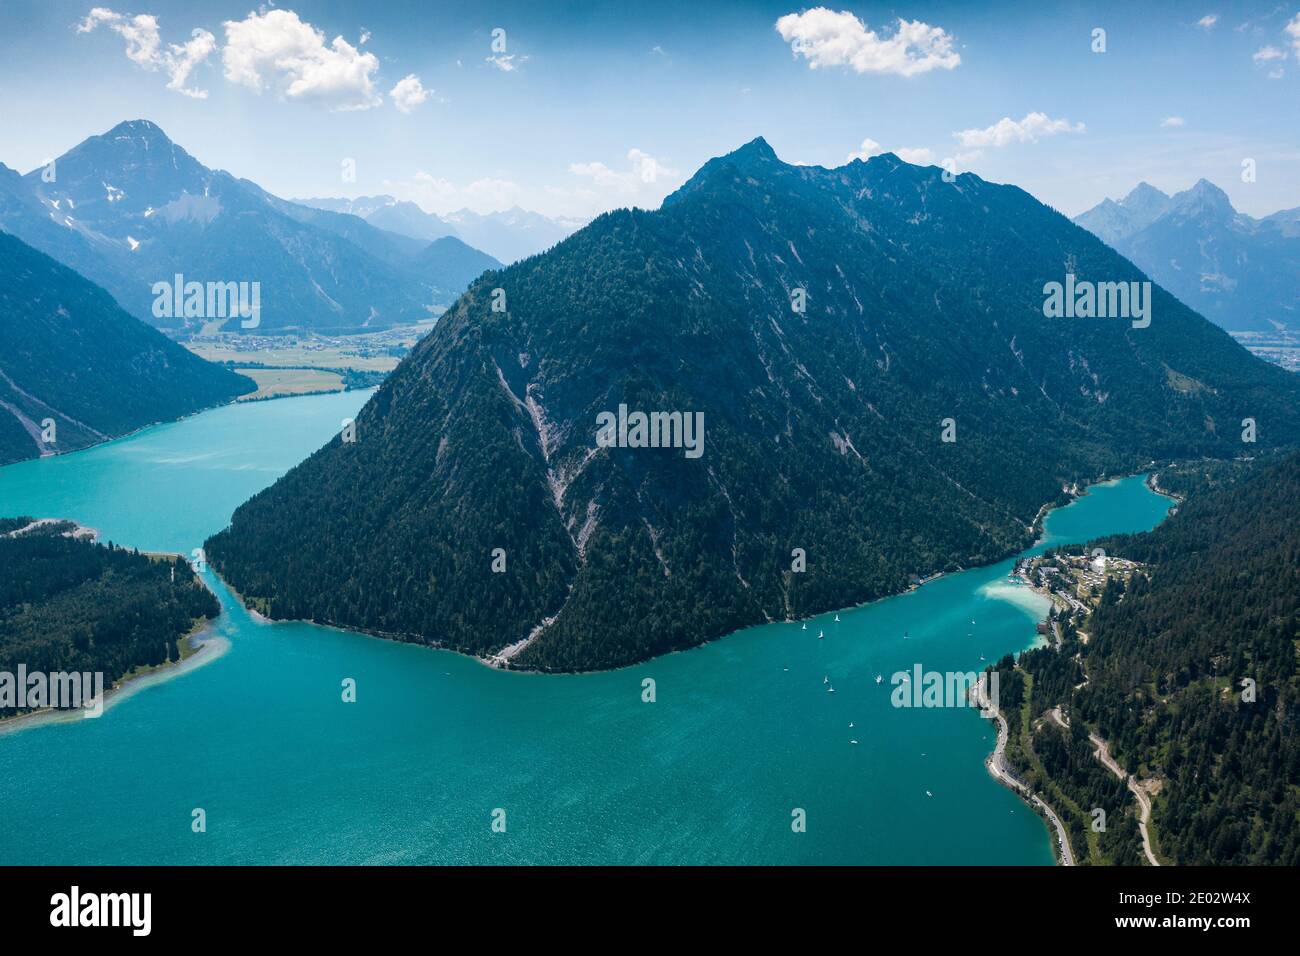 South of Plansee with Kleiner Plansee right and Lake Heiterwang left, Tyrol, Austria Stock Photo